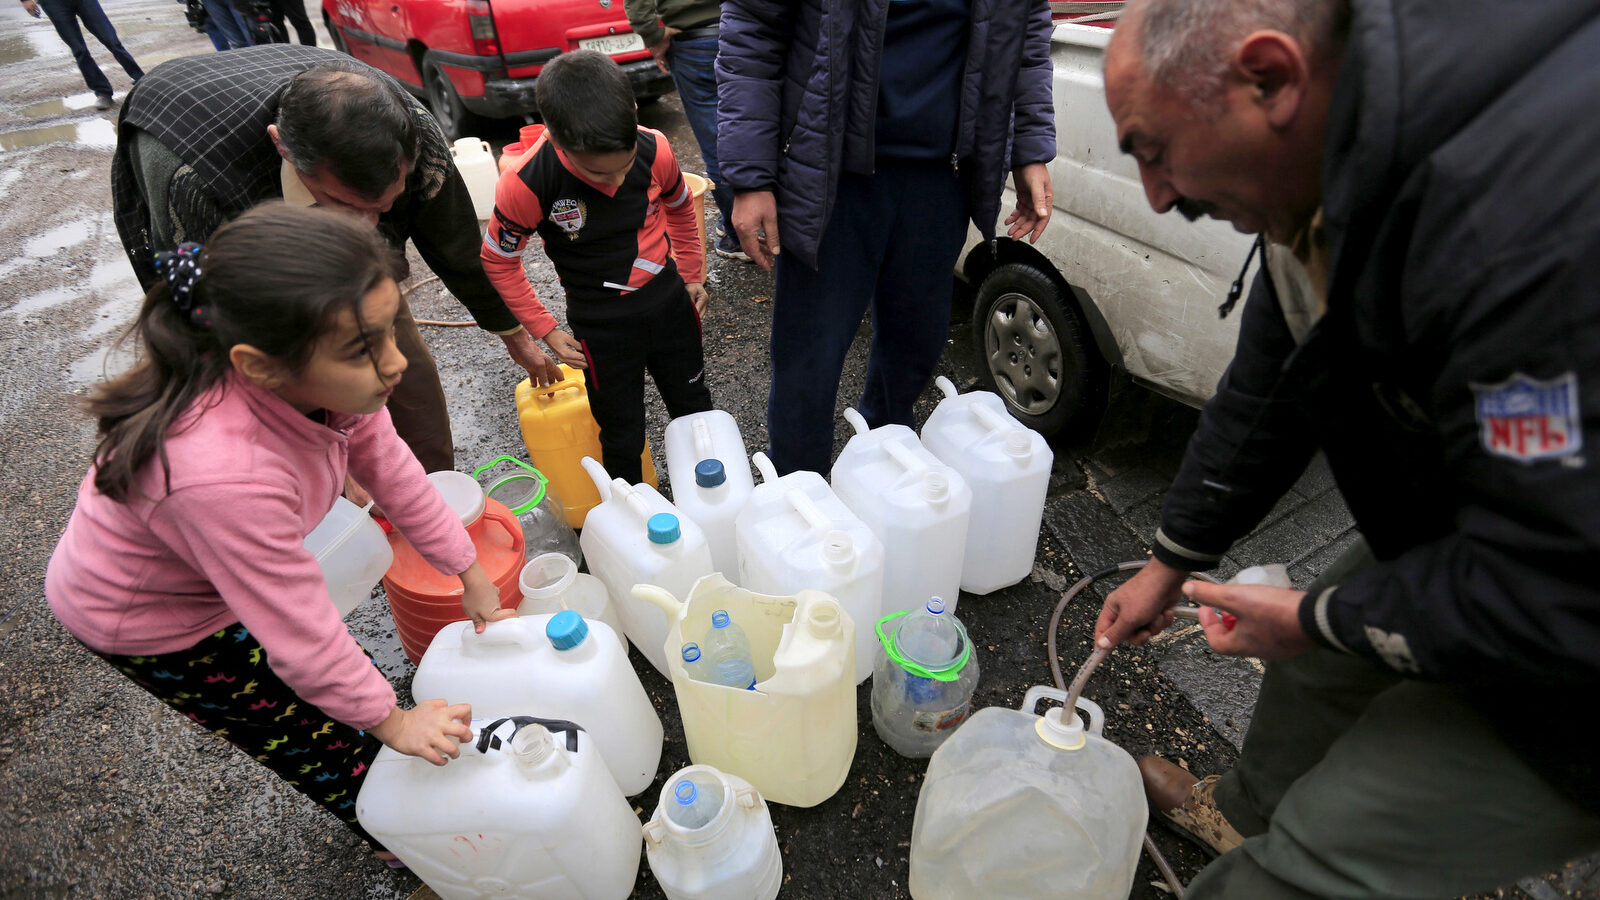 People fill plastic containers with water from a tap water in Damascus, Syria, Monday, Jan. 16, 2017. Water cut-offs have been almost continuous since Dec. 22, in the worst water crisis known to Damascus residents. (AP/Hassan Ammar)